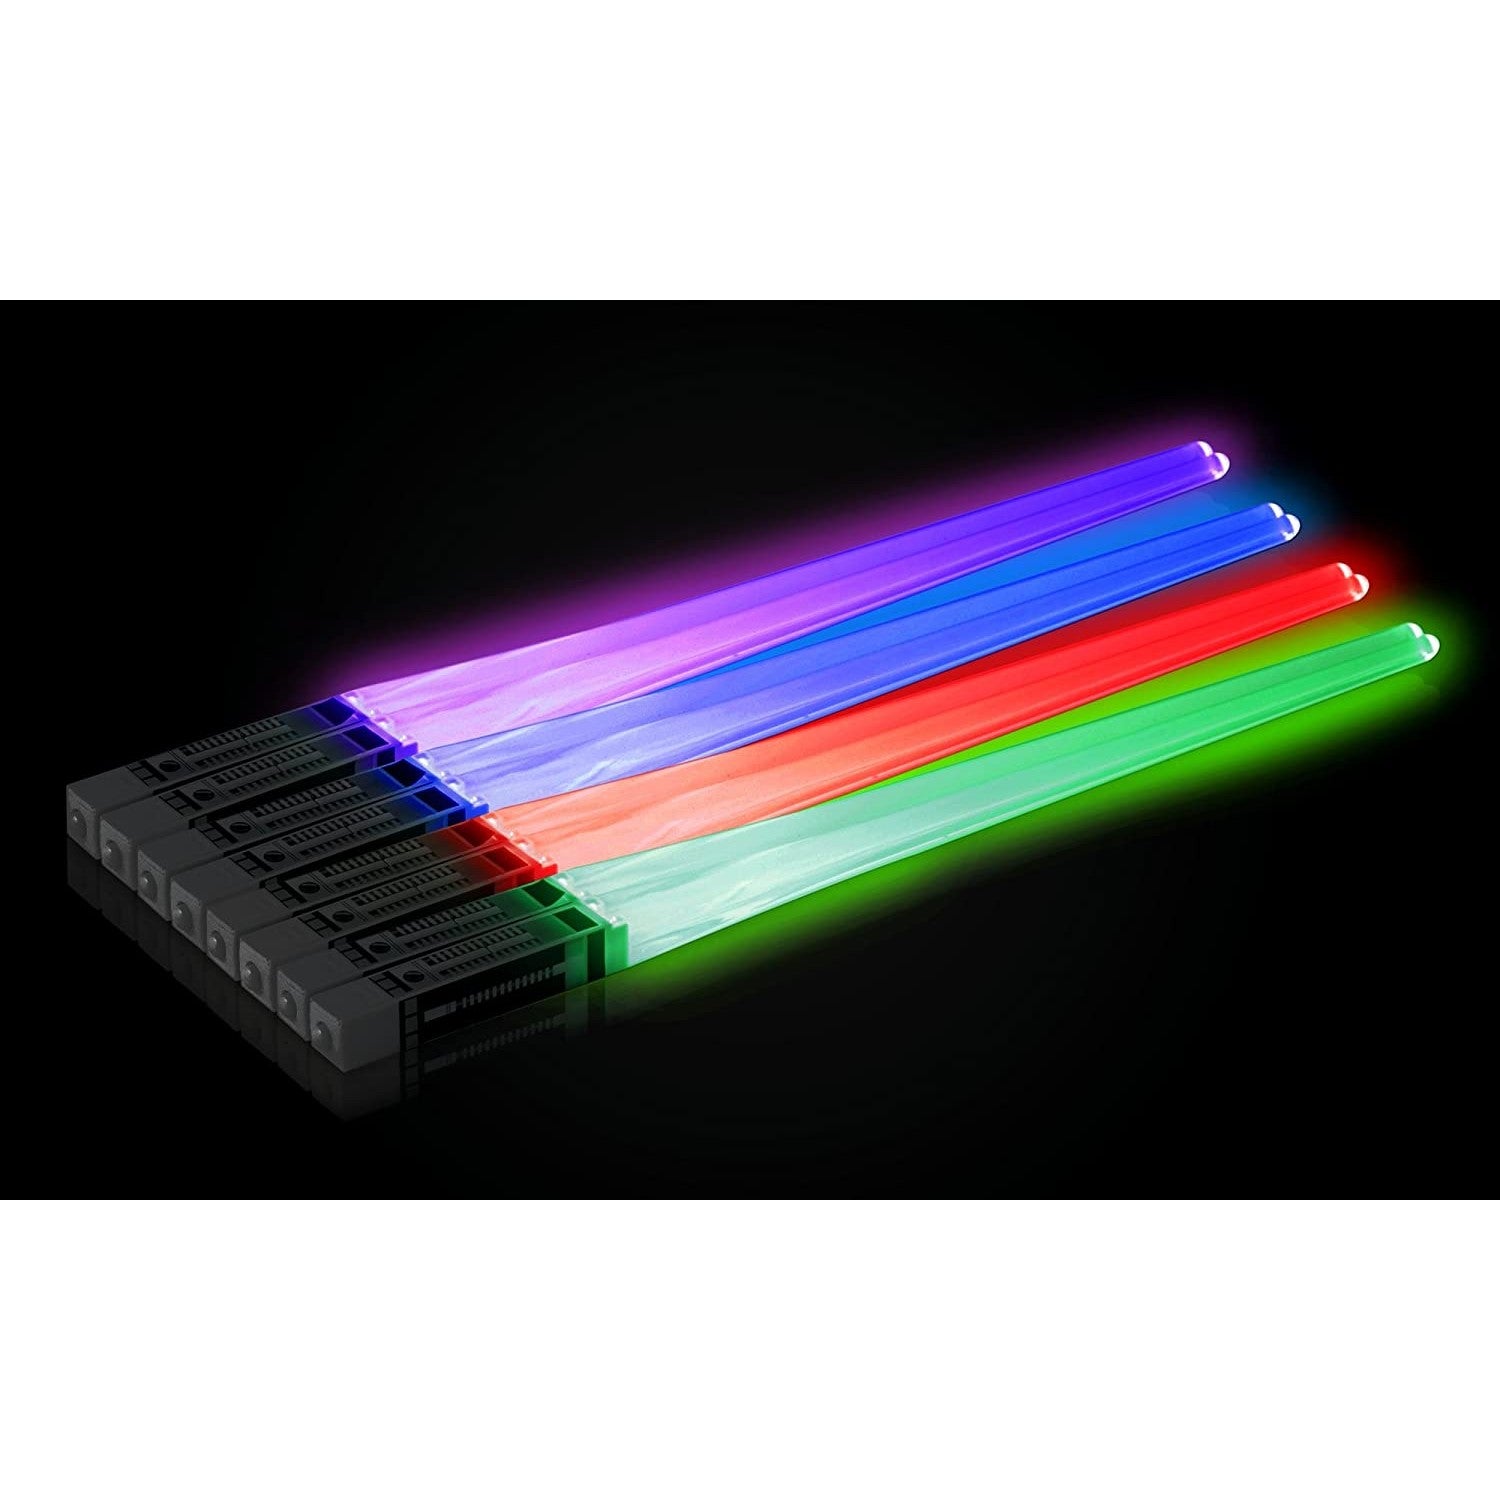 Four sets of lightsaber Star Wars light-up chopsticks. The chopsticks are lit-up and the colors are purple, blue, red and green.